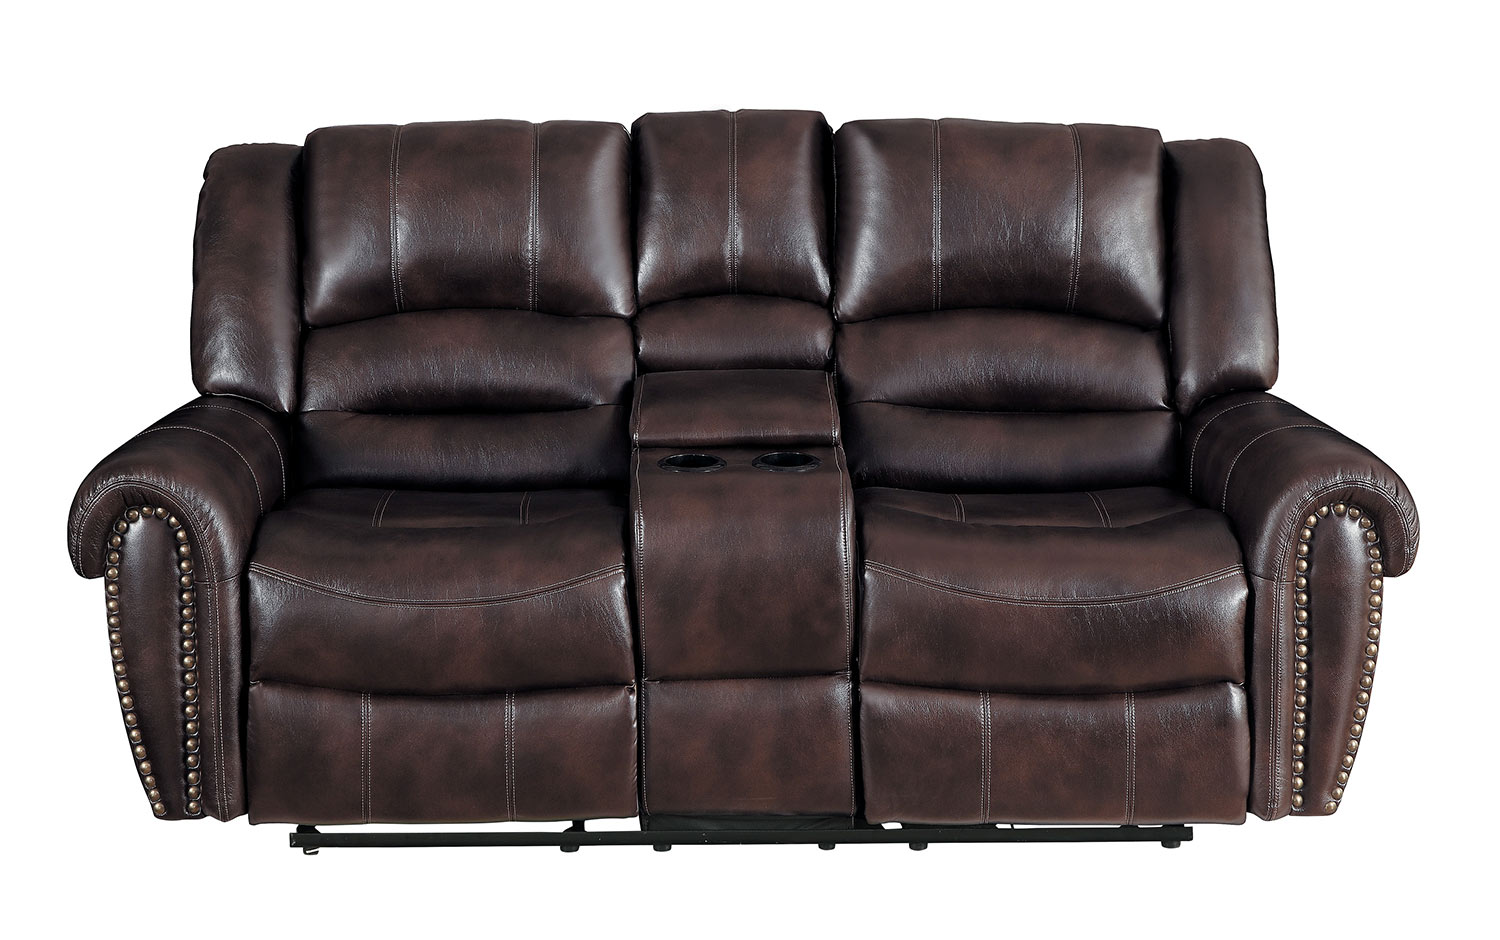 Homelegance Center Hill Double Glider Reclining Love Seat With Center Console - Dark Brown